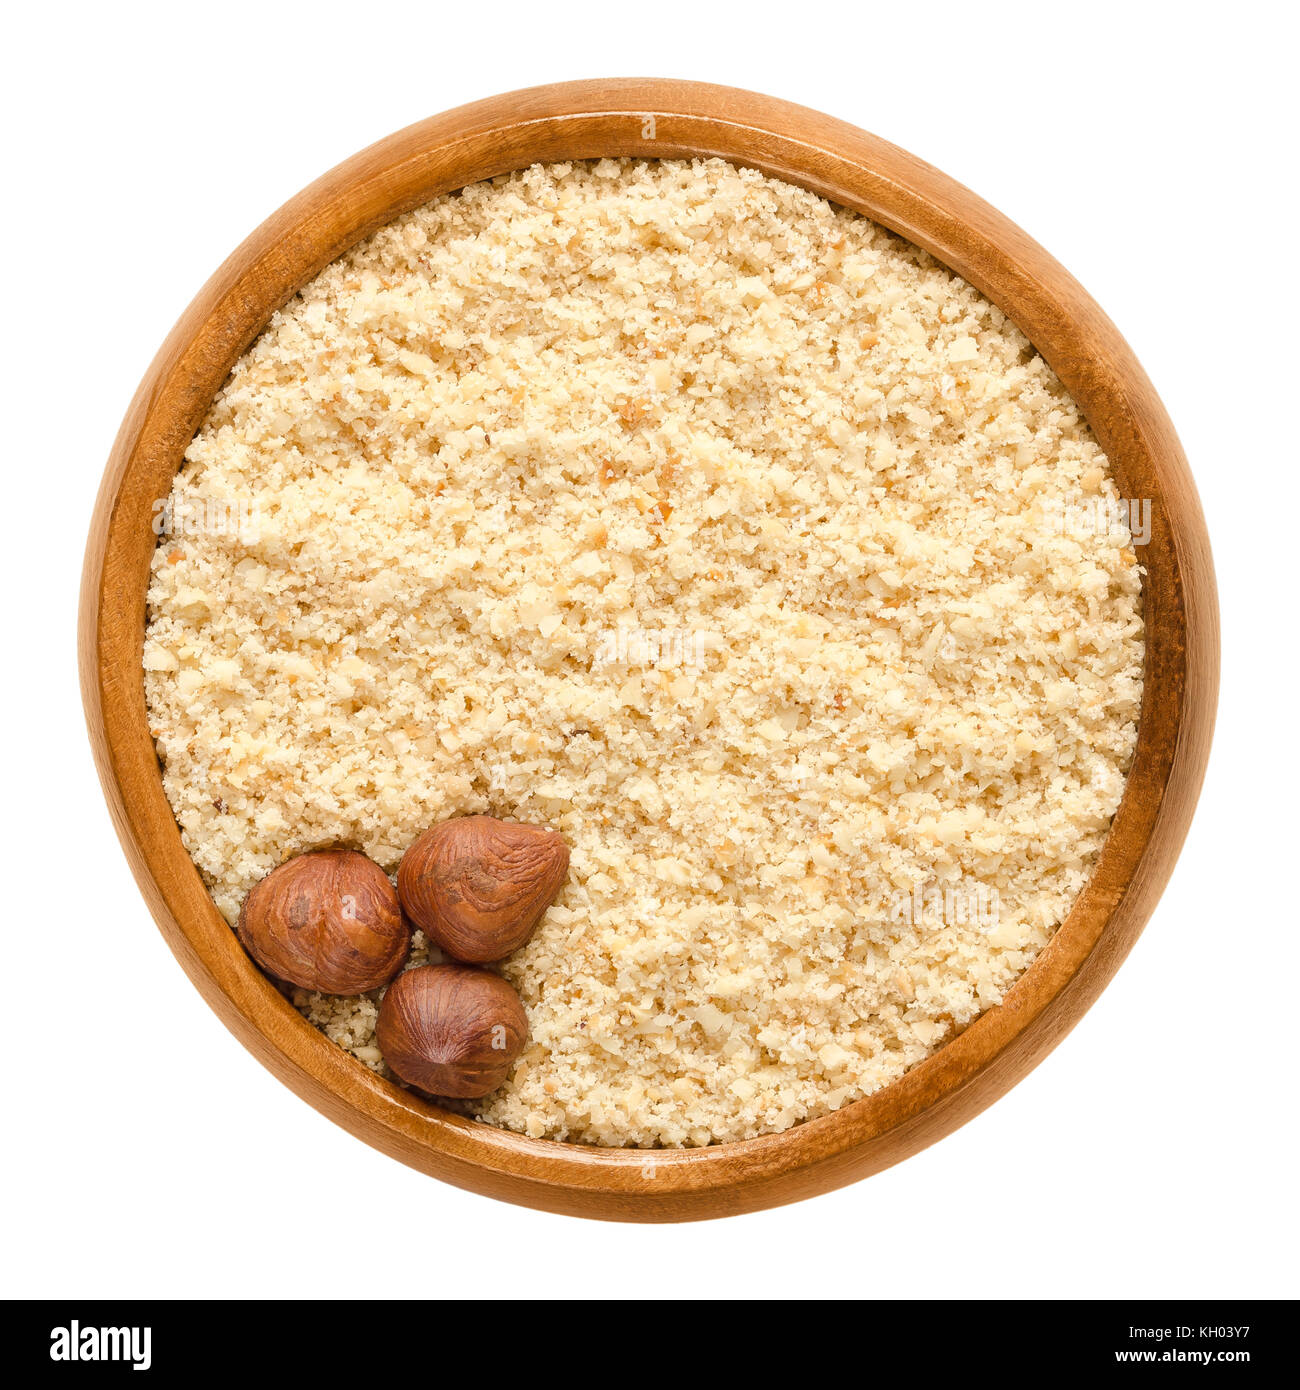 Three shelled hazelnuts on hazelnut meal in wooden bowl. Grounded nuts of hazel, Corylus avellana, also called cobnut or filbert nut. Stock Photo